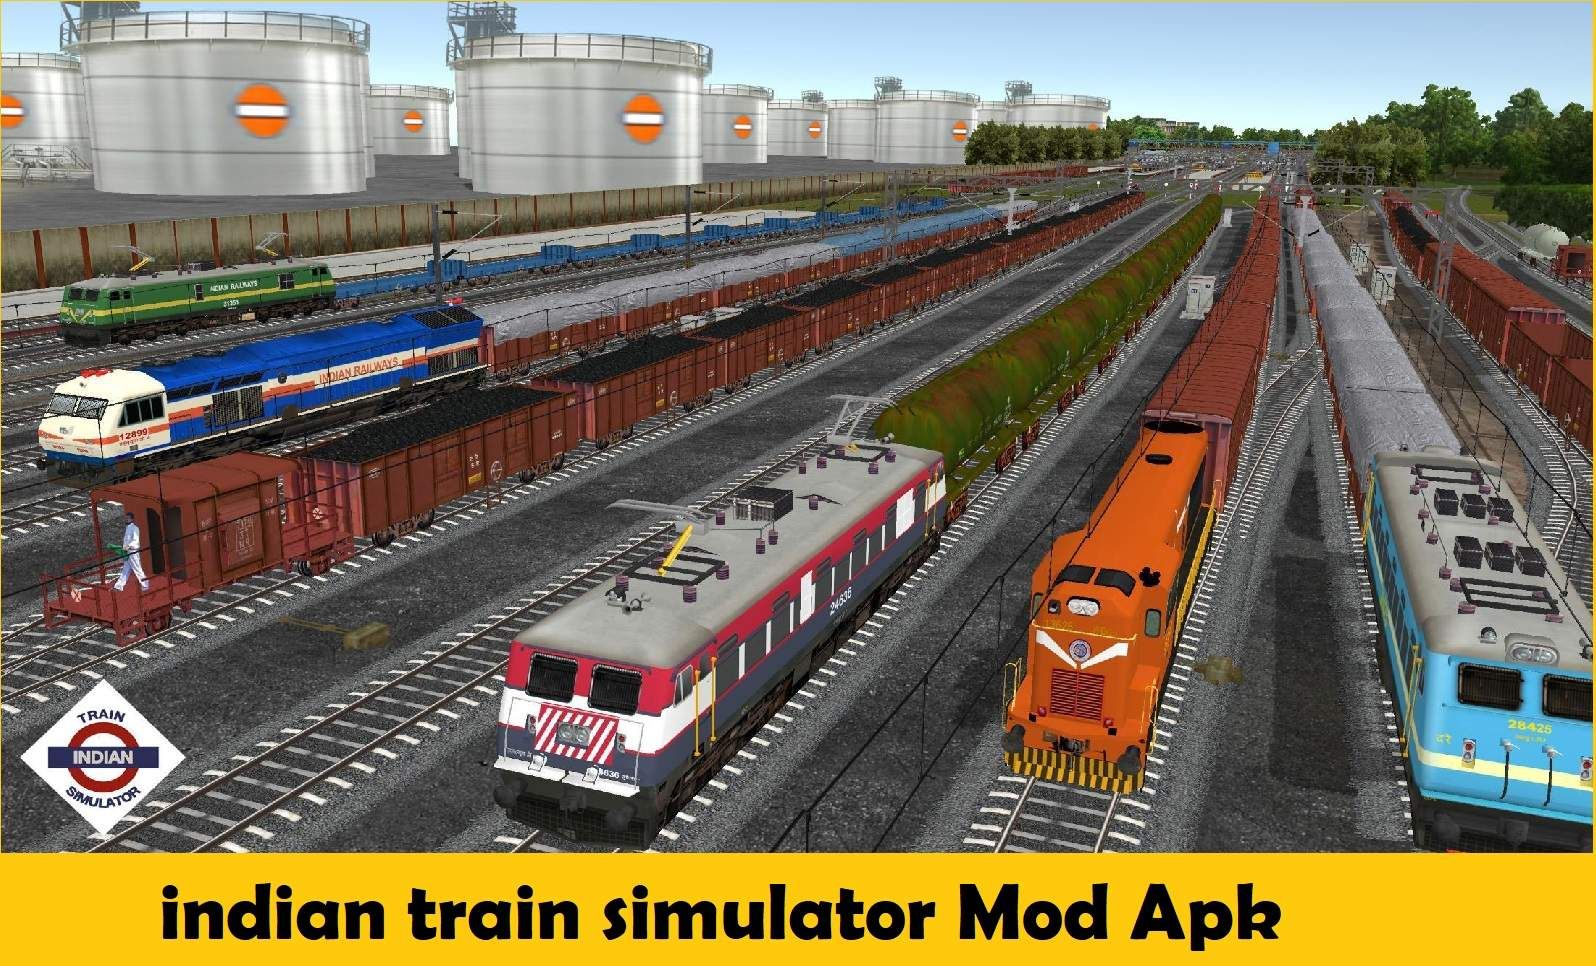 The Indian Train Simulator Mod Apk: Pros and Cons, Features an